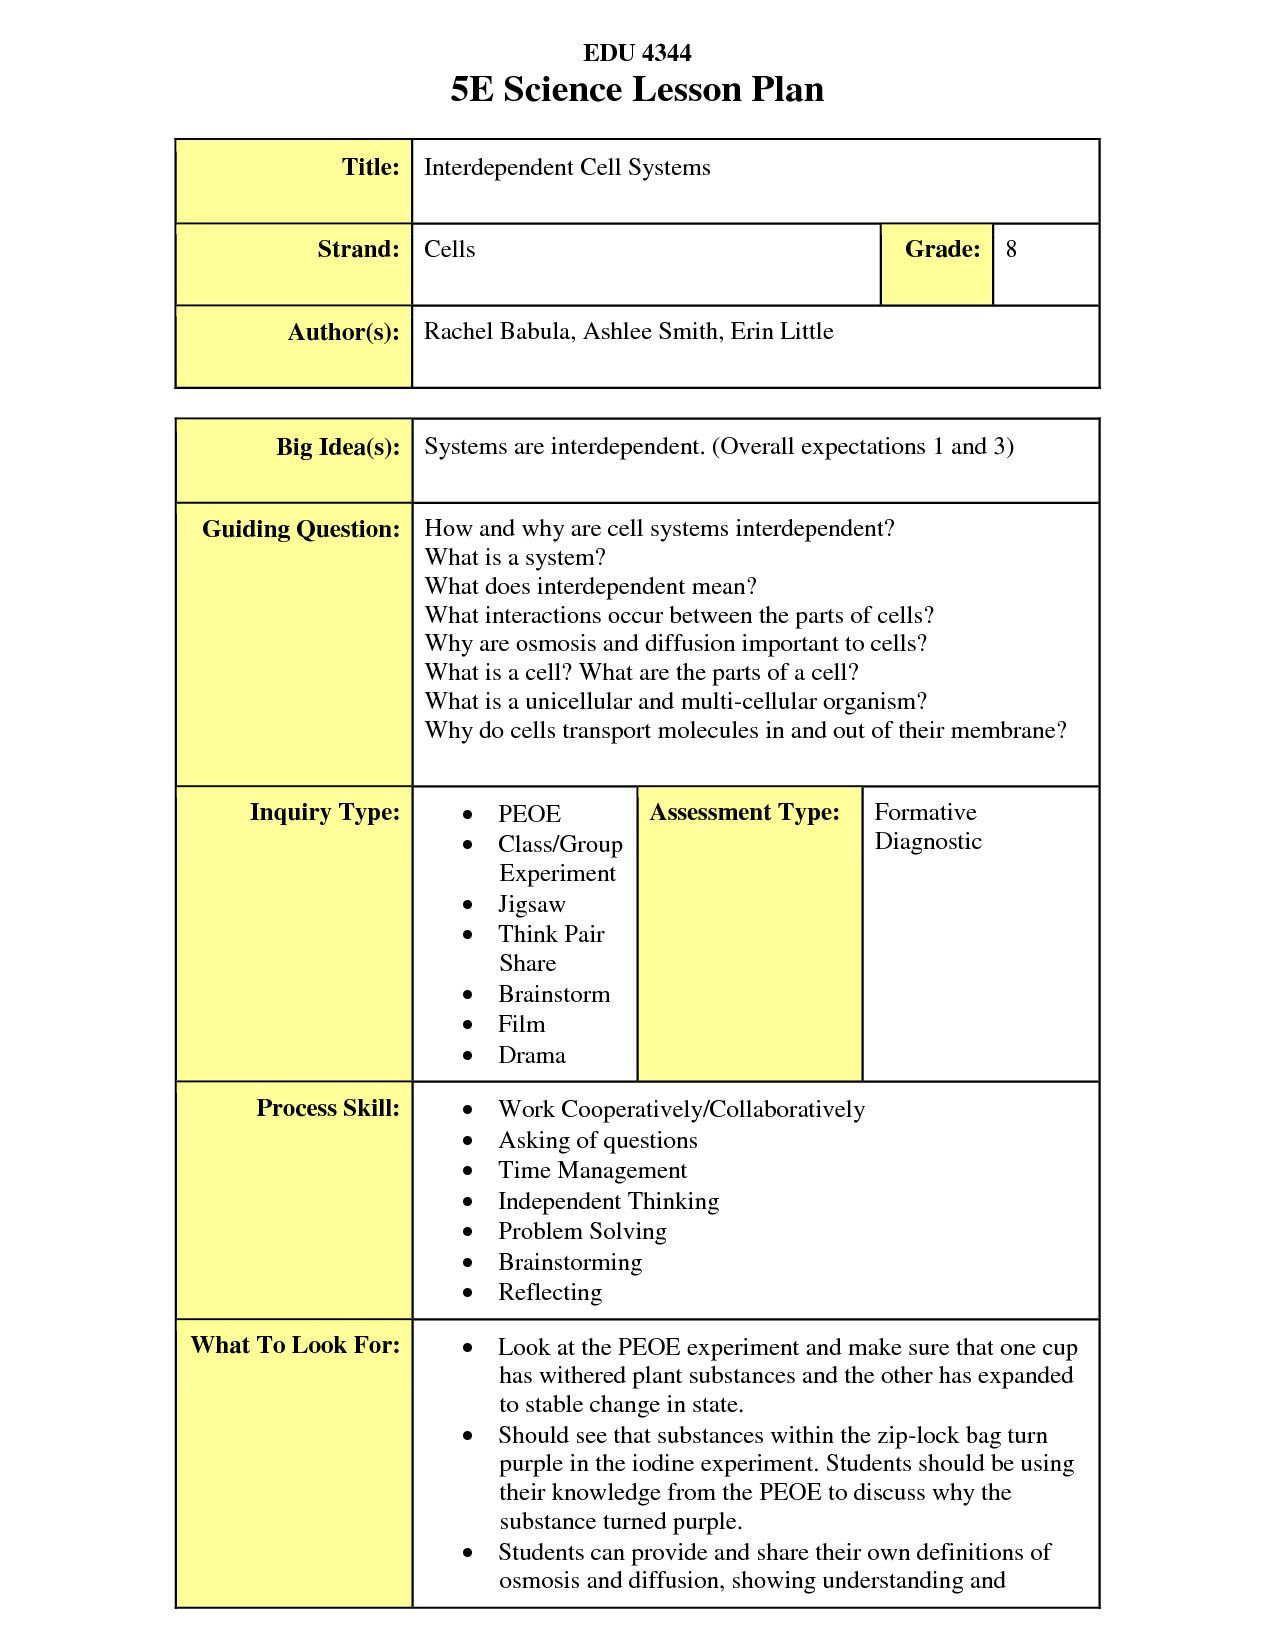 Lesson Plan for Science 20 Science Lesson Plan Template In 2020